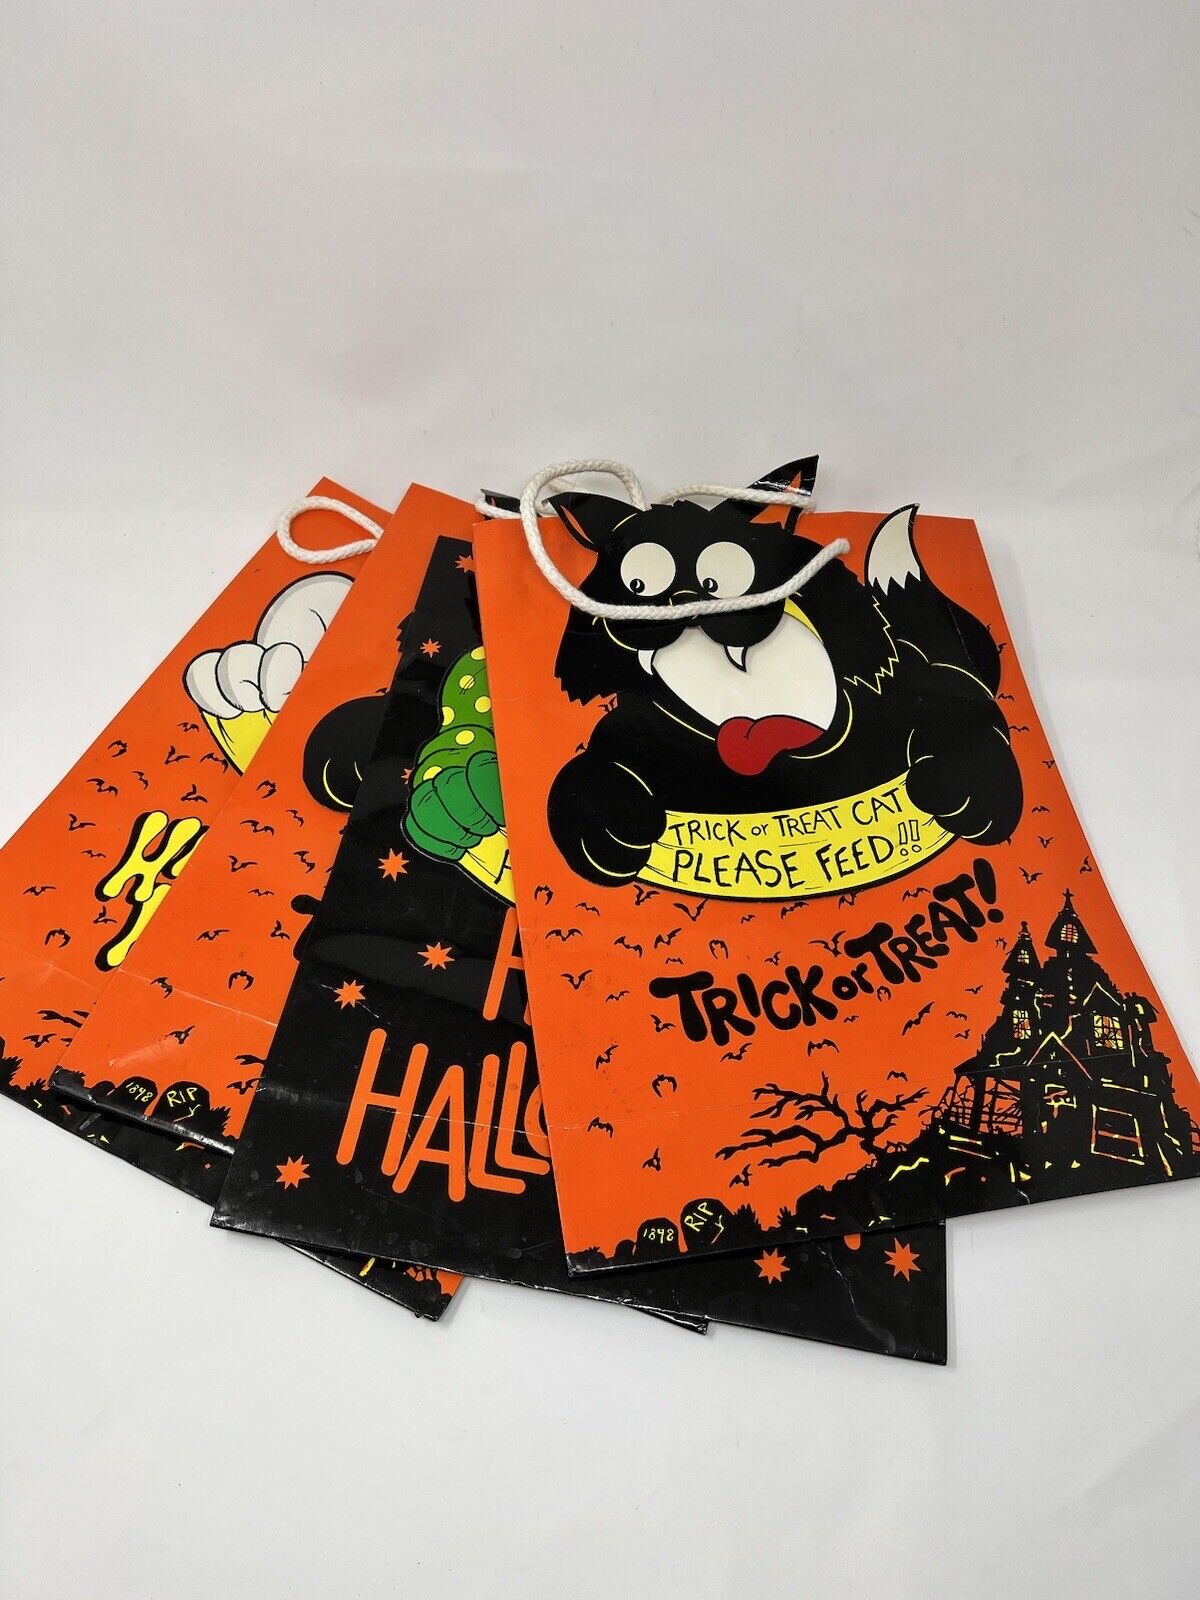 Vintage 90s Halloween Black Cat Pumpkin Ghost Trick or Treat Candy Bags Lot Of 4